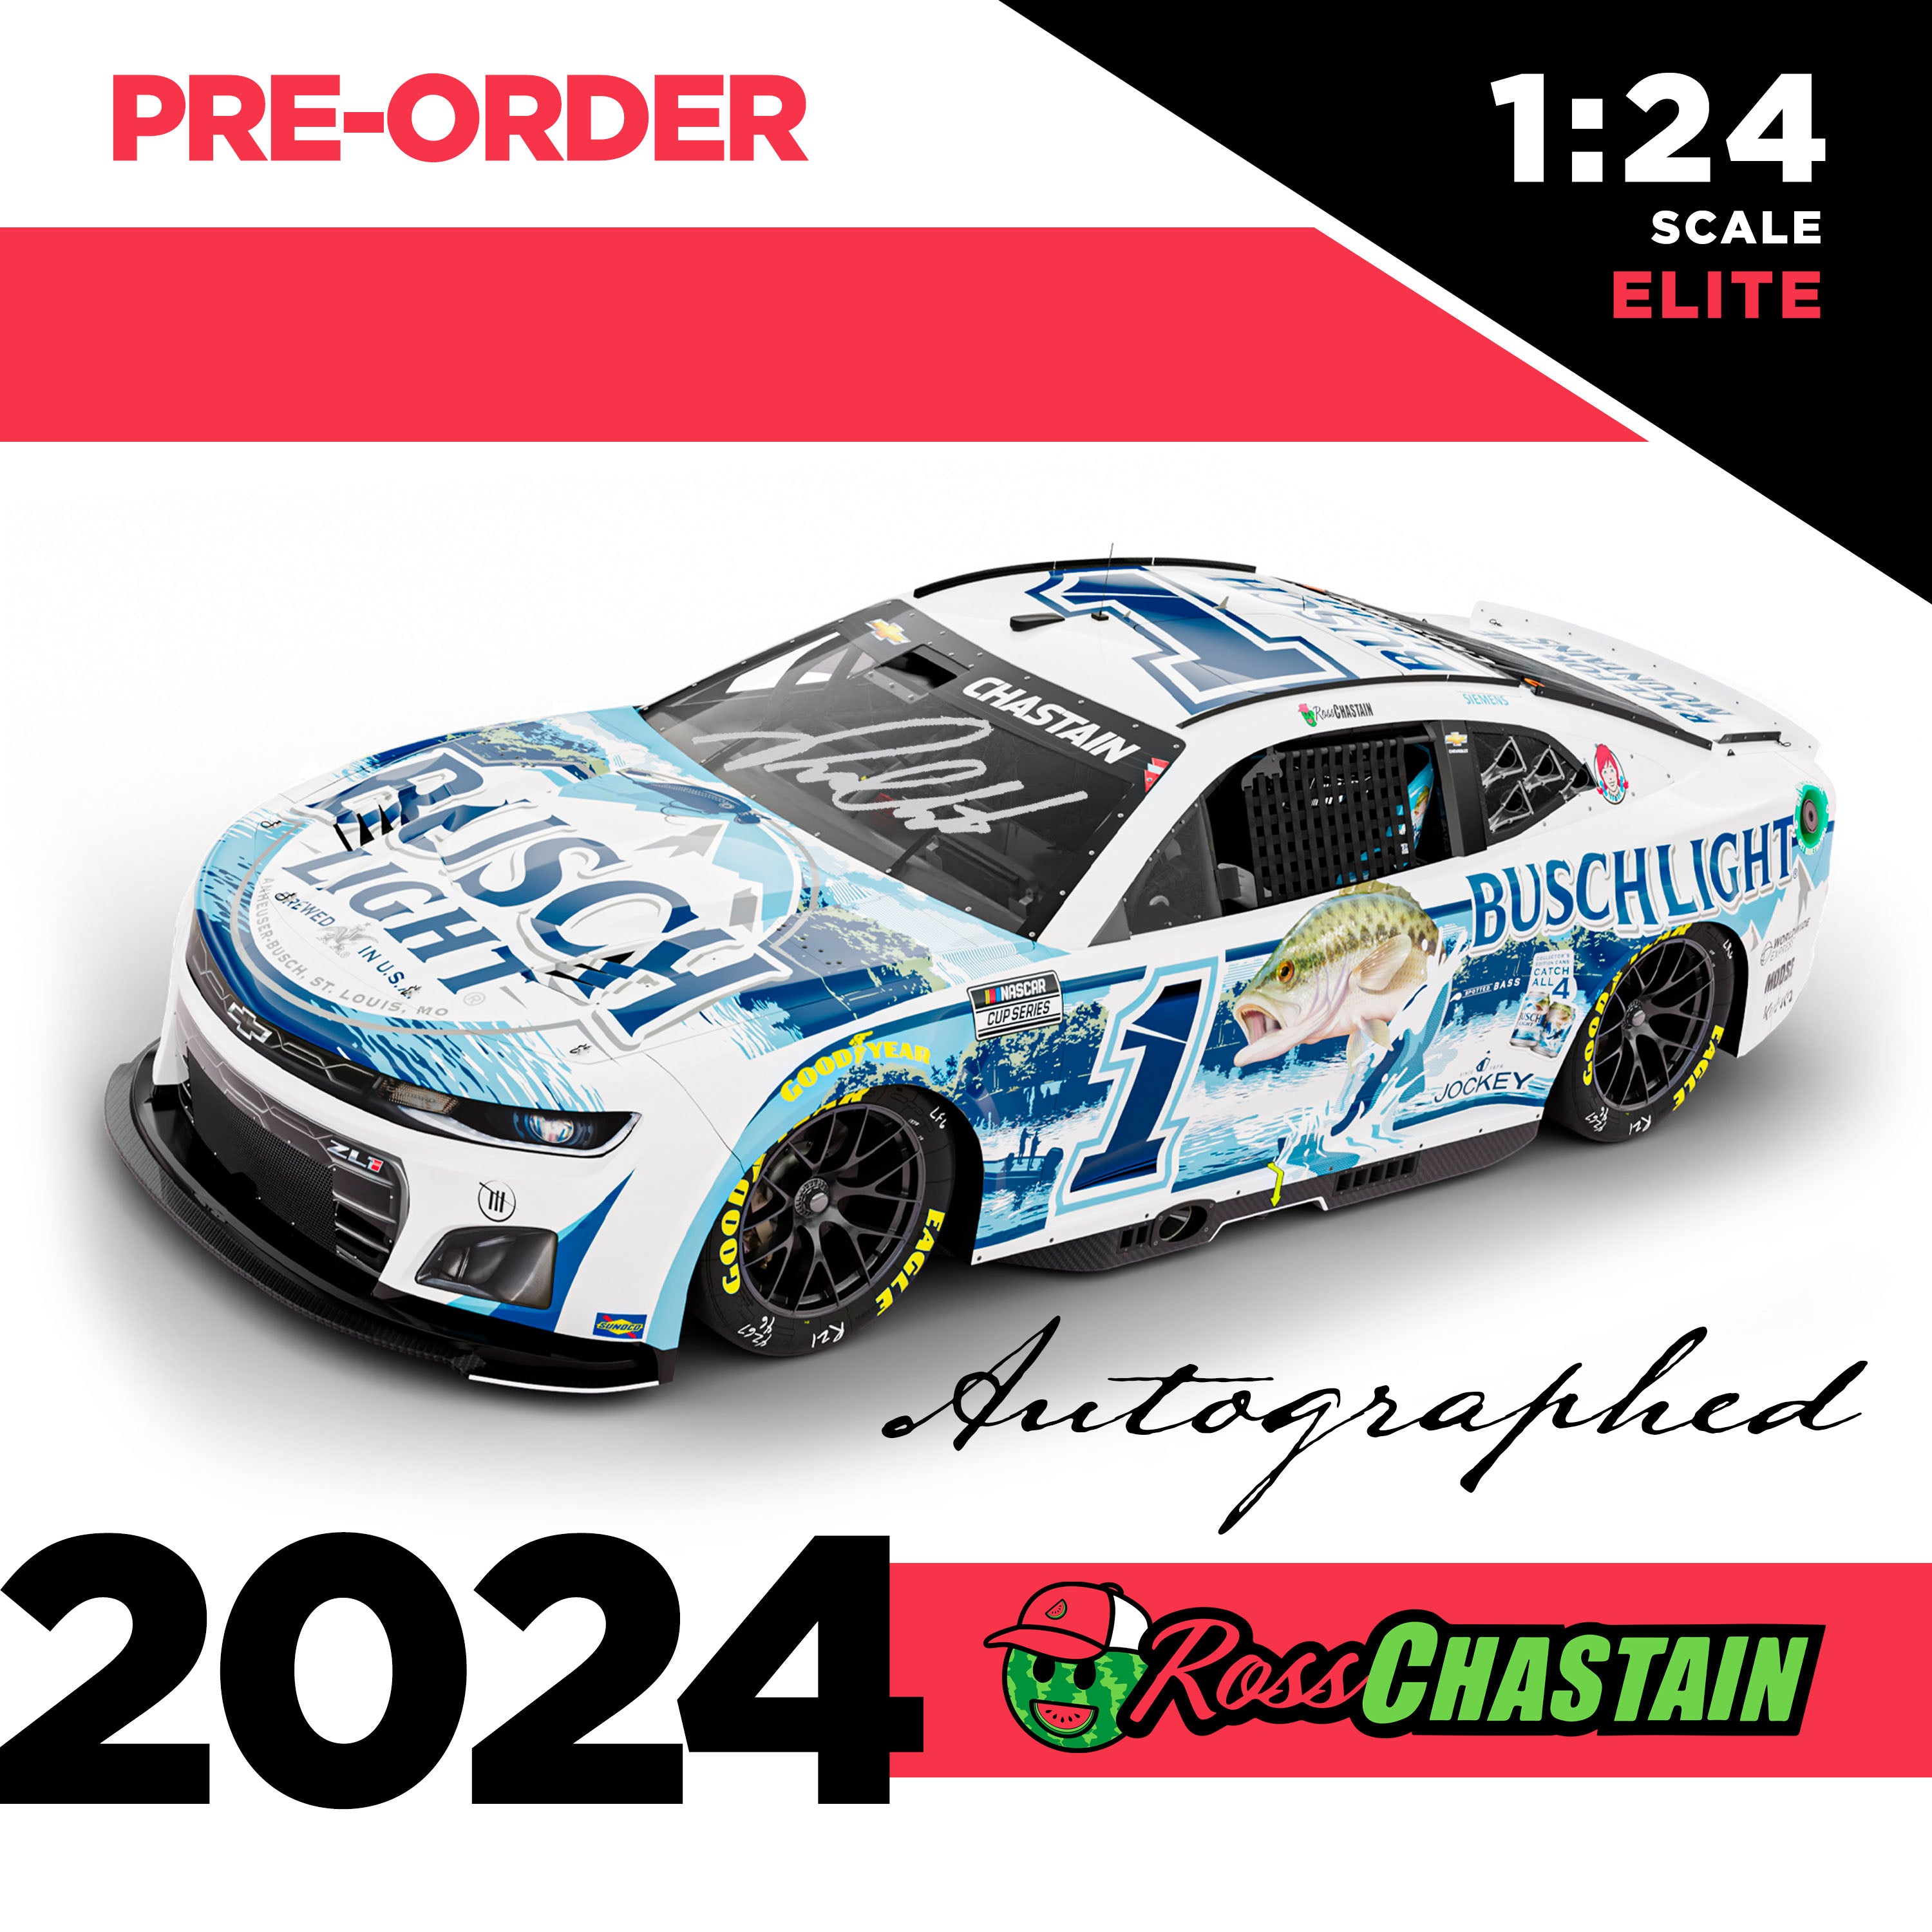 AUTOGRAPHED Ross Chastain 2024 No.1 1:24 Busch Light FISHING ELITE